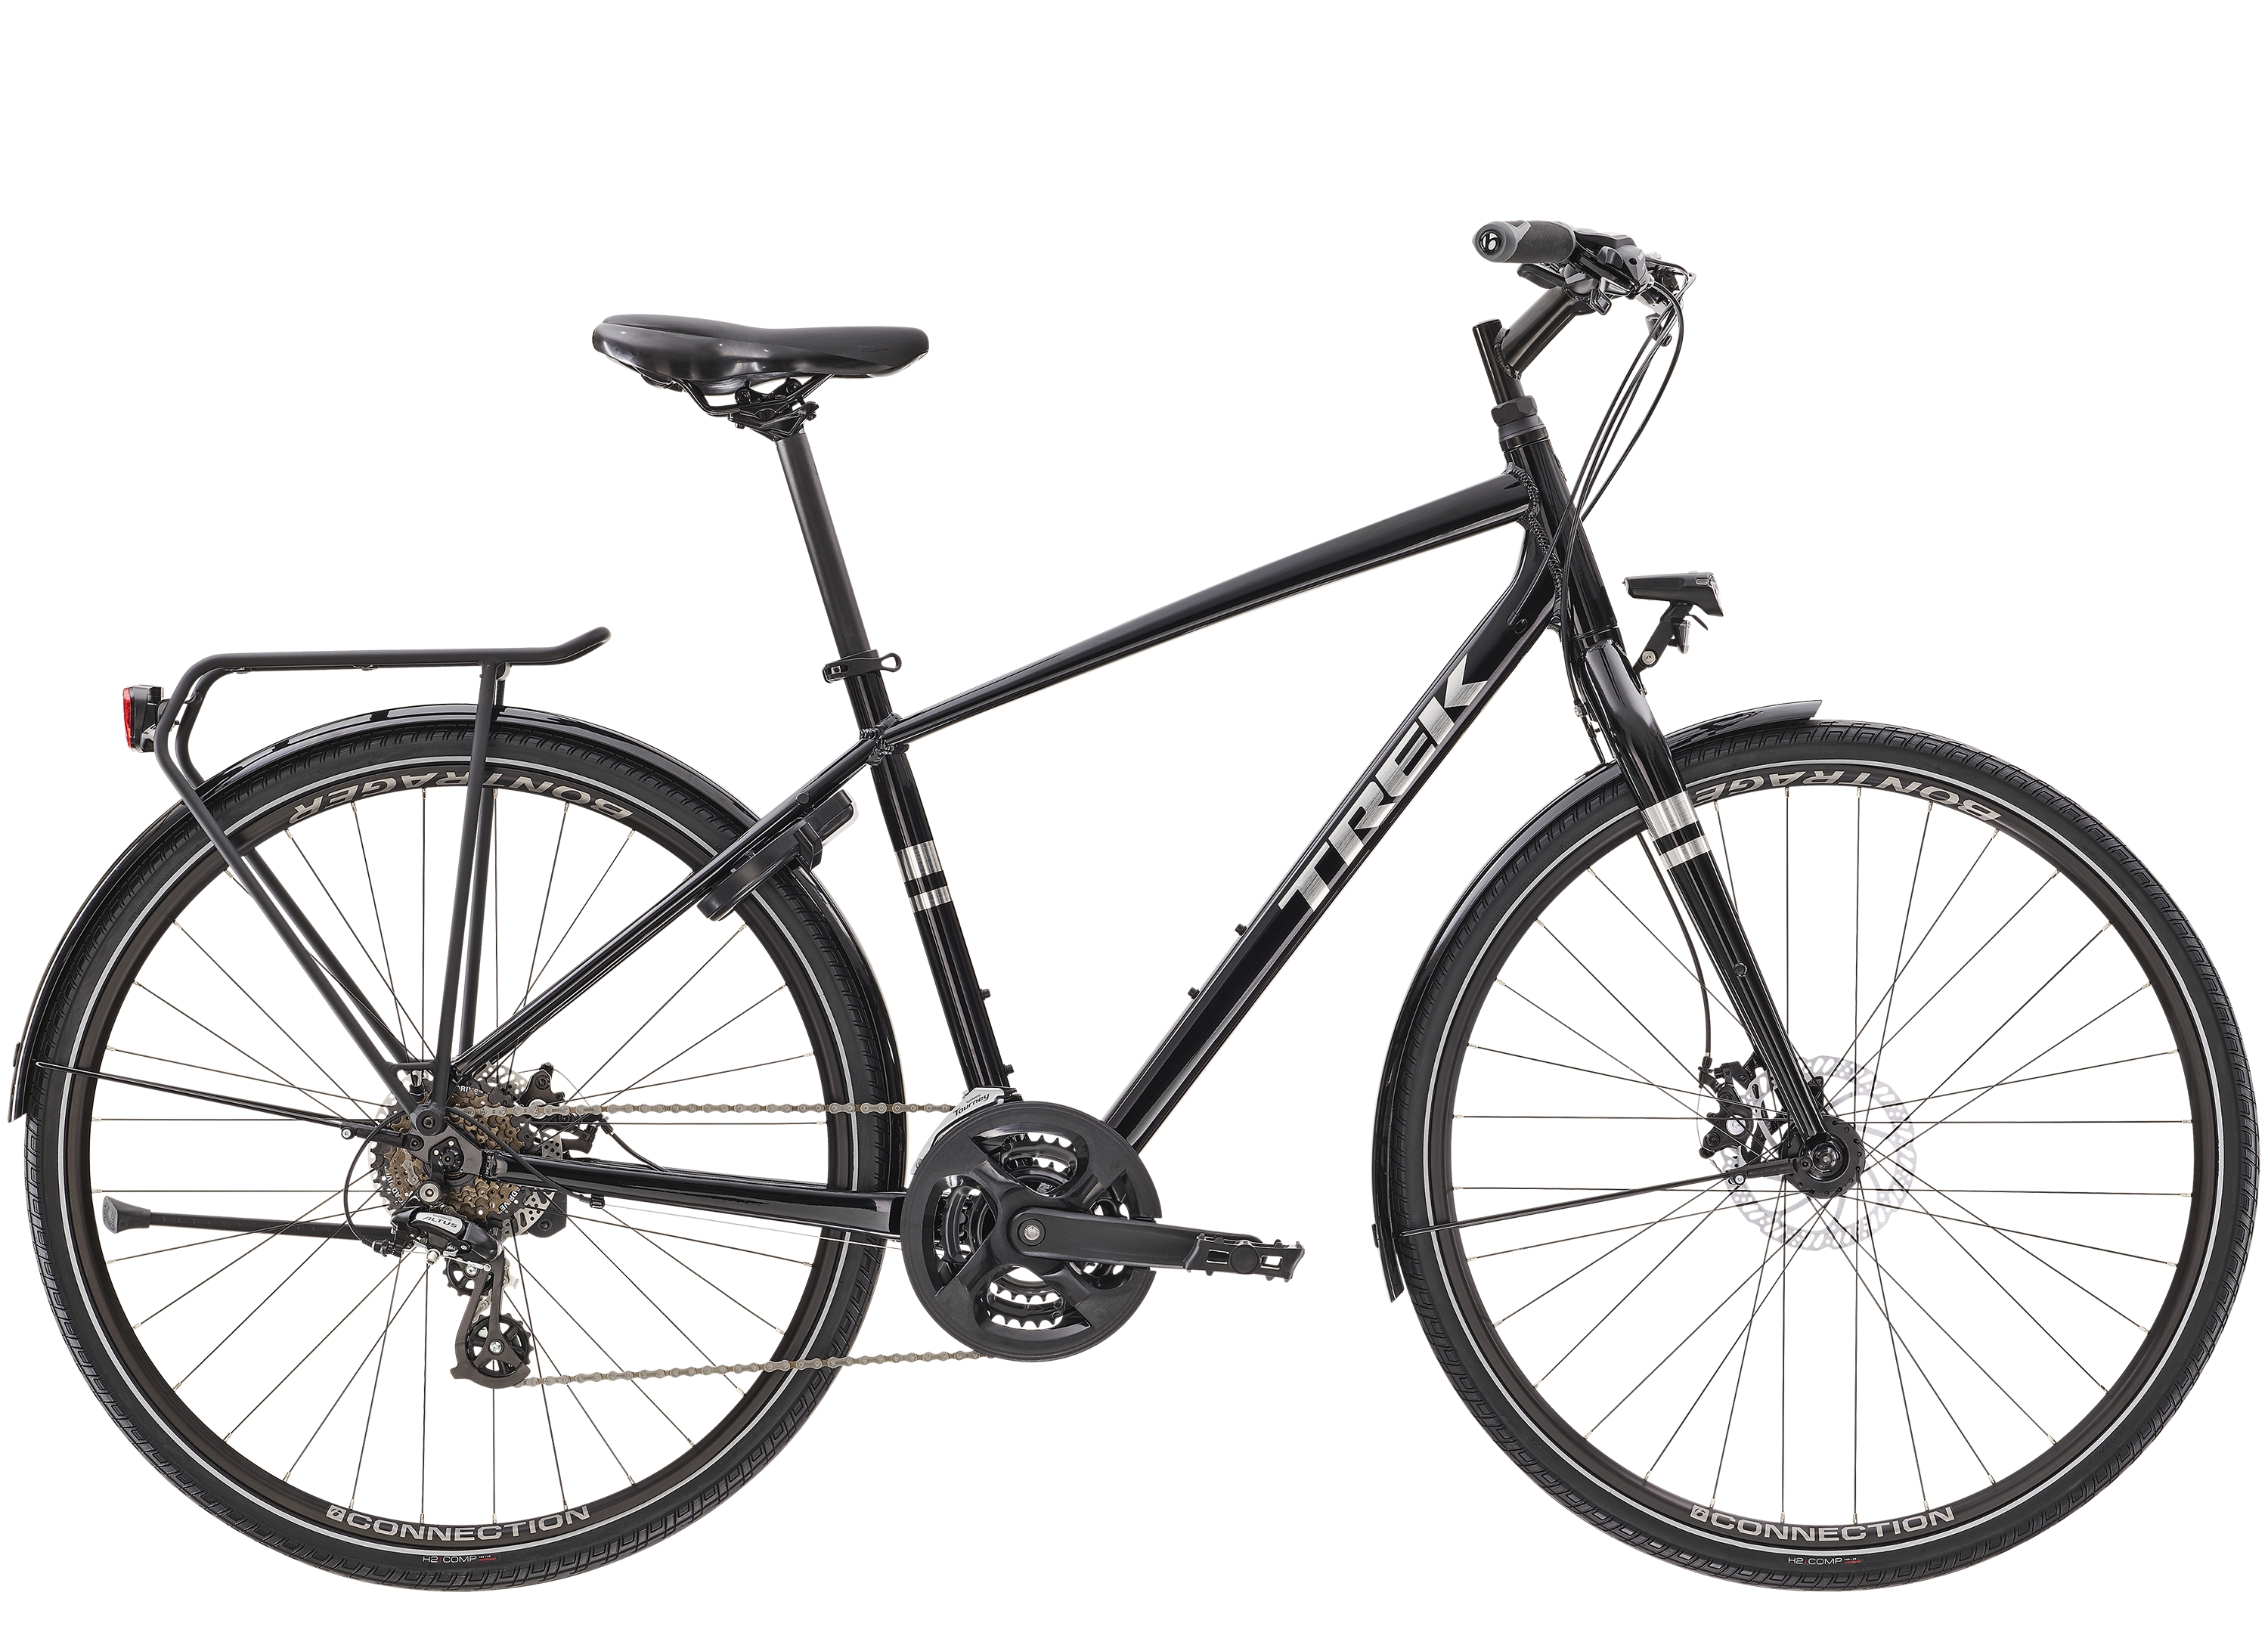 <a href="https://cycles-clement.be/product/verve-1-eq-l-trek-black-lr6/">VERVE 1 EQ L TREK BLACK LR6</a>